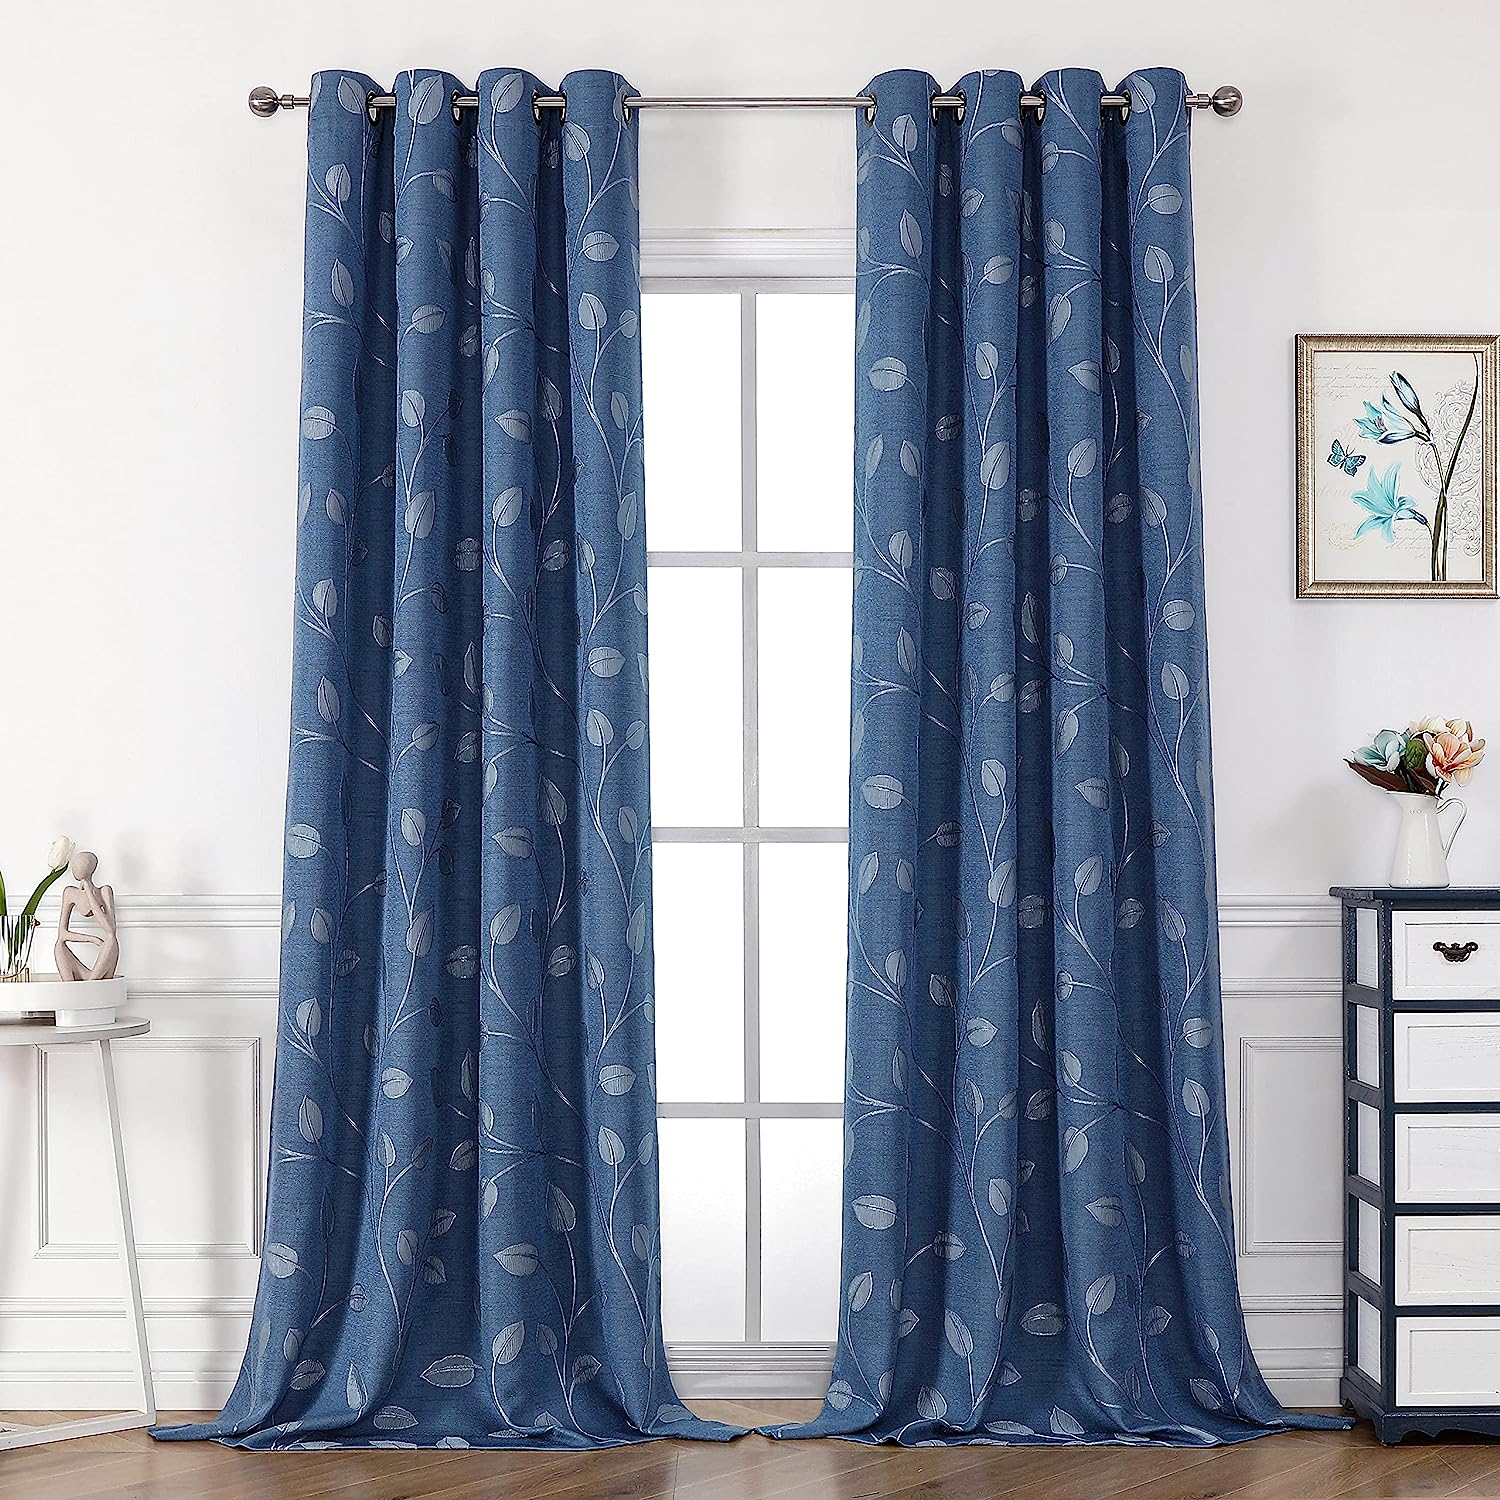 WEST LAKE Dusty Blue Leaf Jacquard Curtains 84 Inches [...]